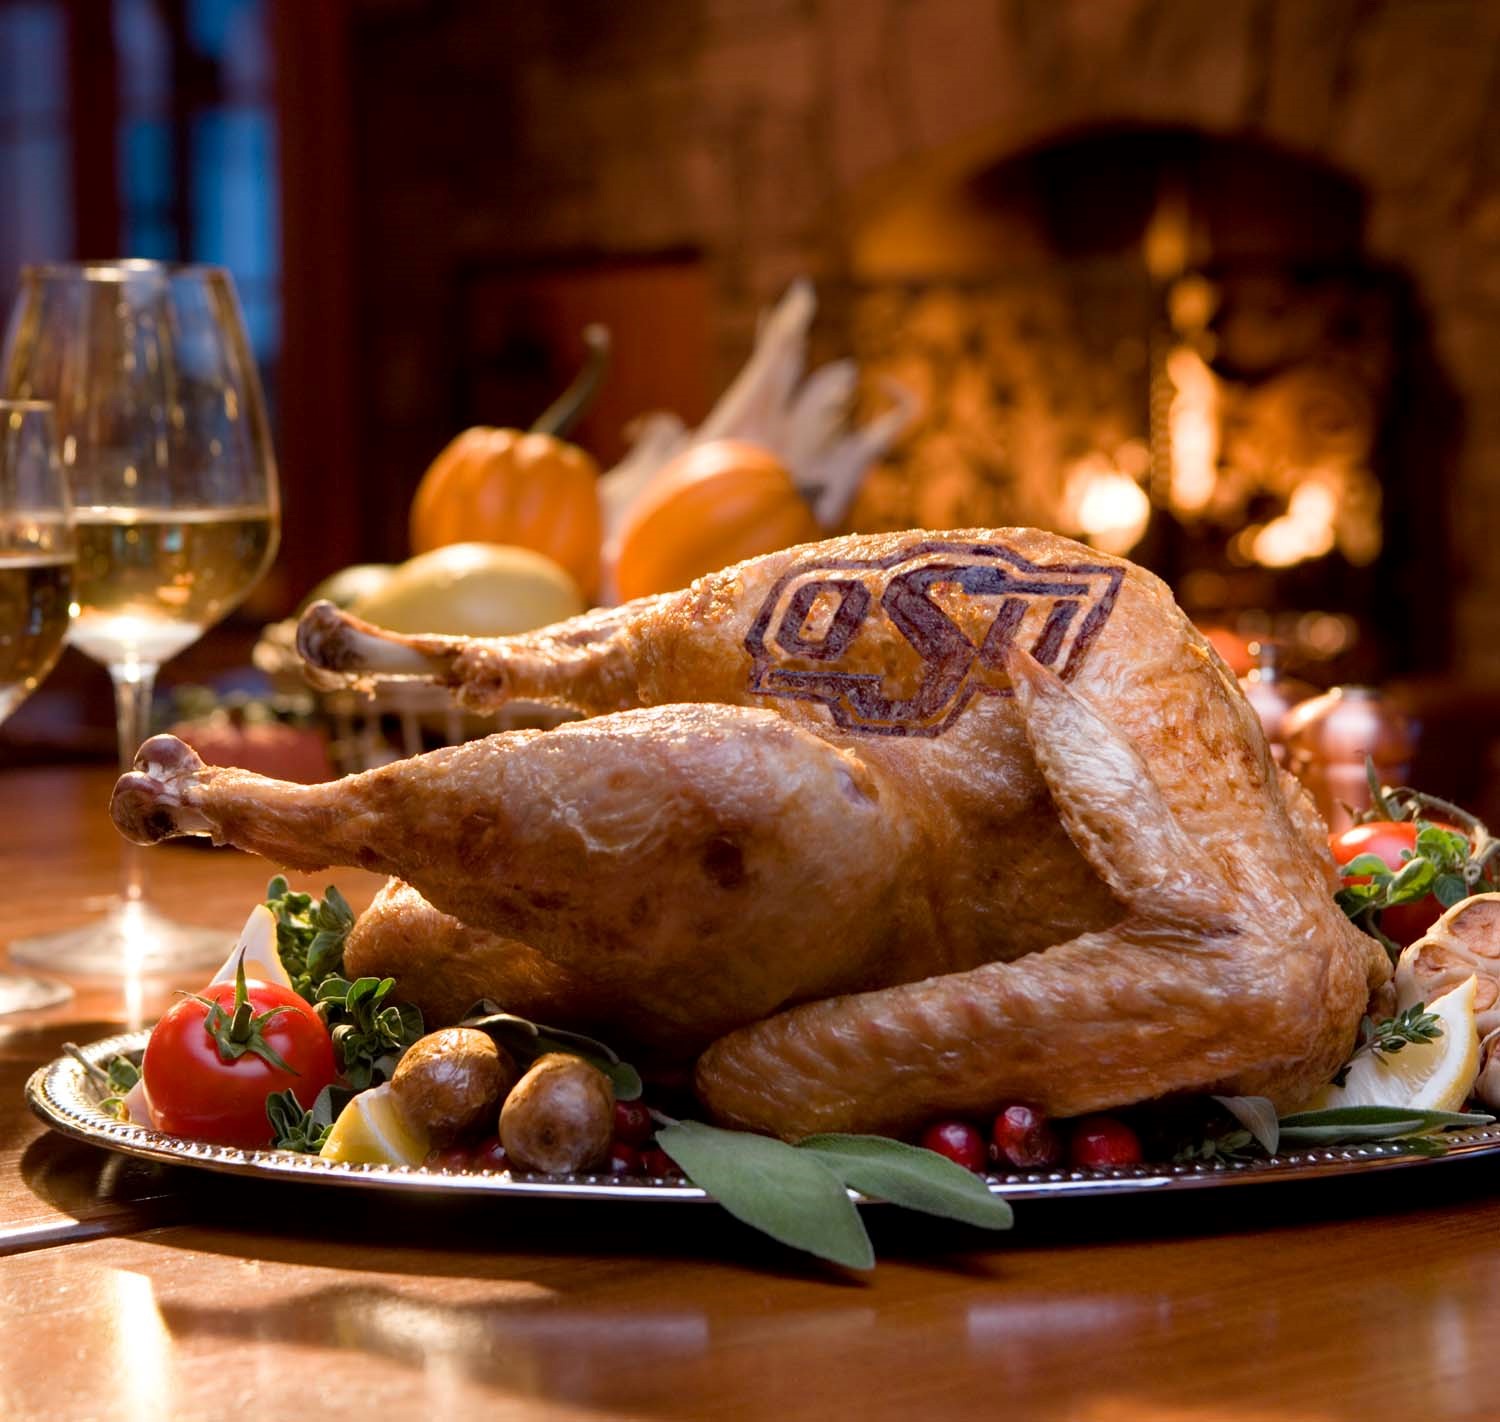 FAPC Offers Food Safety Tips When Preparing for Your Meal this Thanksgiving